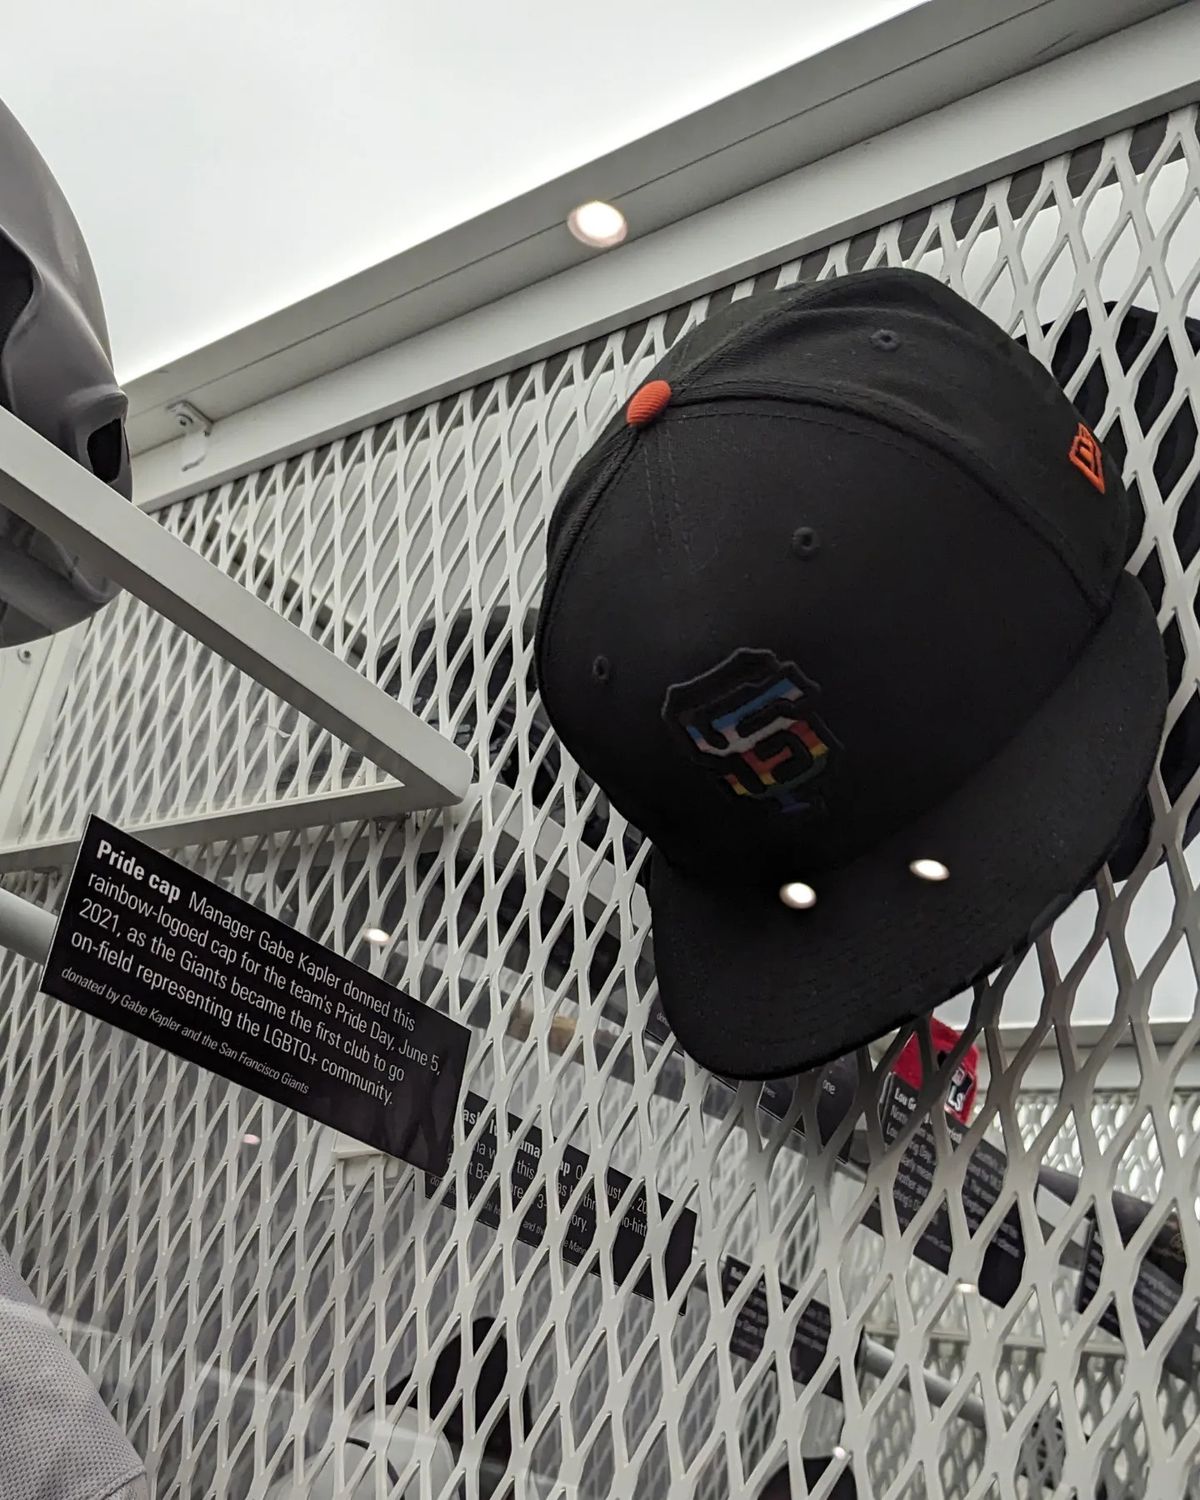 Rainbow baseball cap on display in the Hall of Fame.